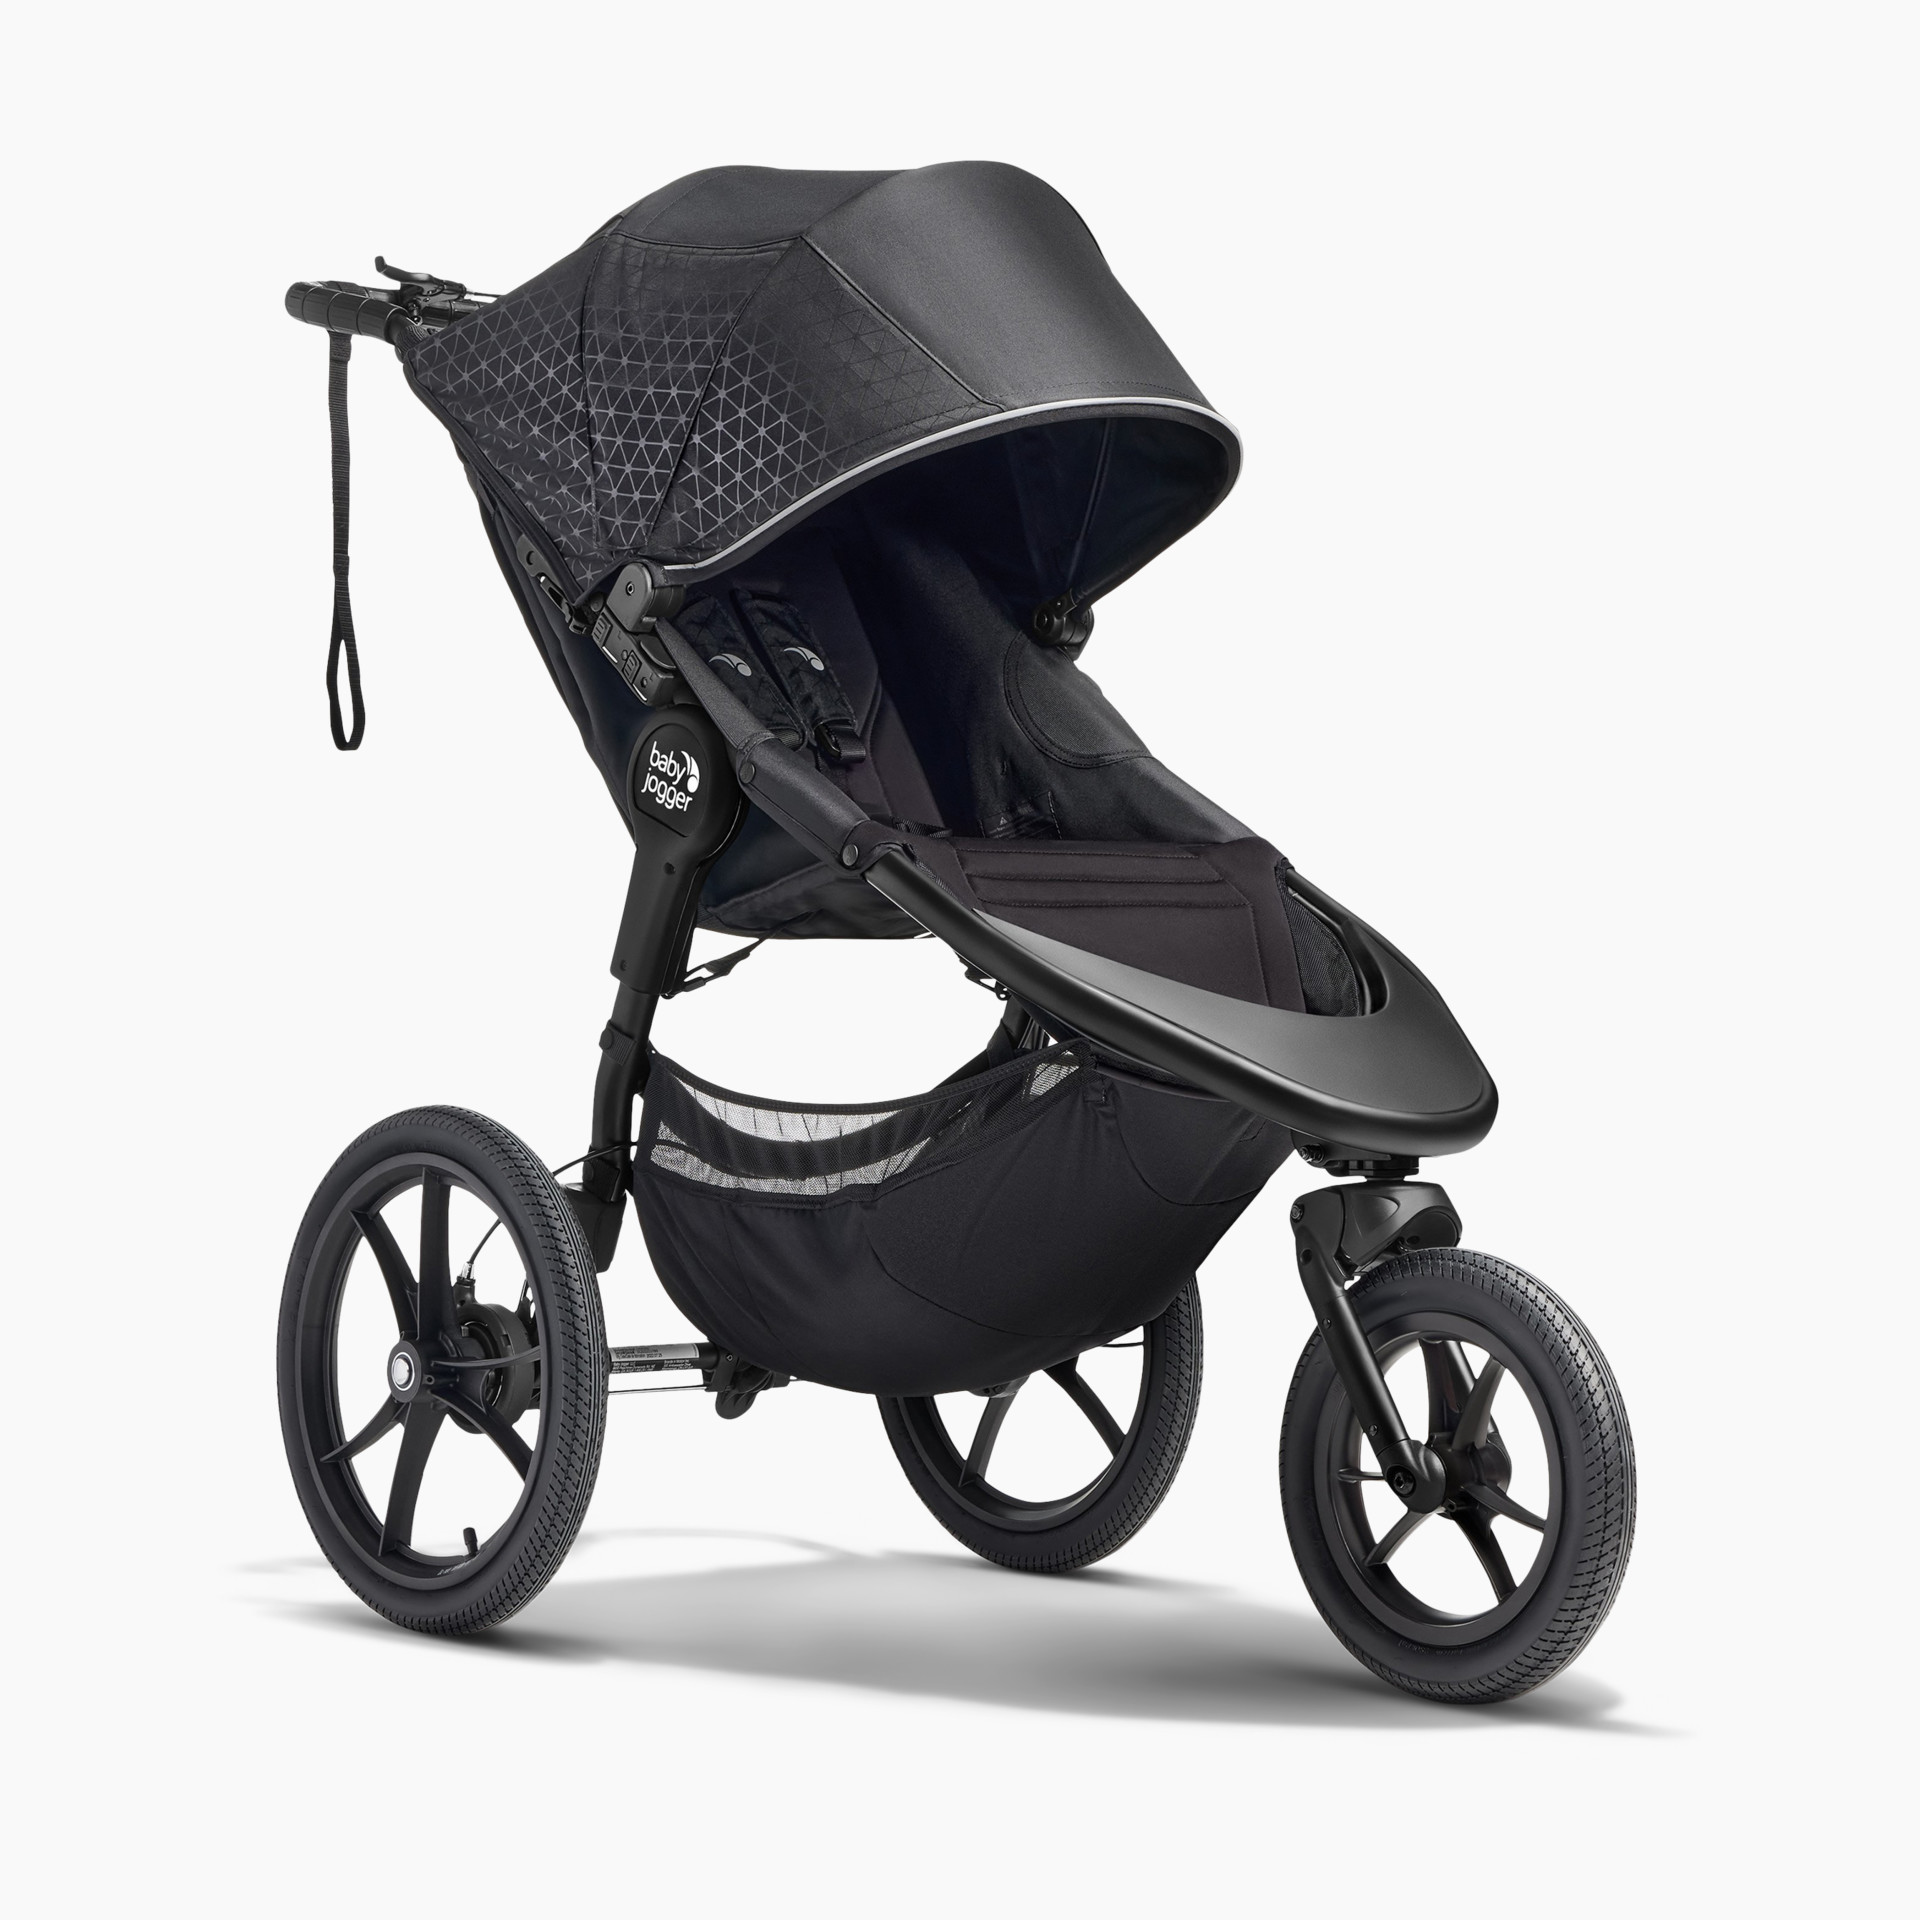  Bugaboo Fox 5 All-Terrain Stroller, 2-in-1 Baby Stroller with  Full Suspension, Easy Fold, Spacious Bassinet, Extendable Toddler Seat,  One-Handed Maneuverability (Midnight Black) : Baby